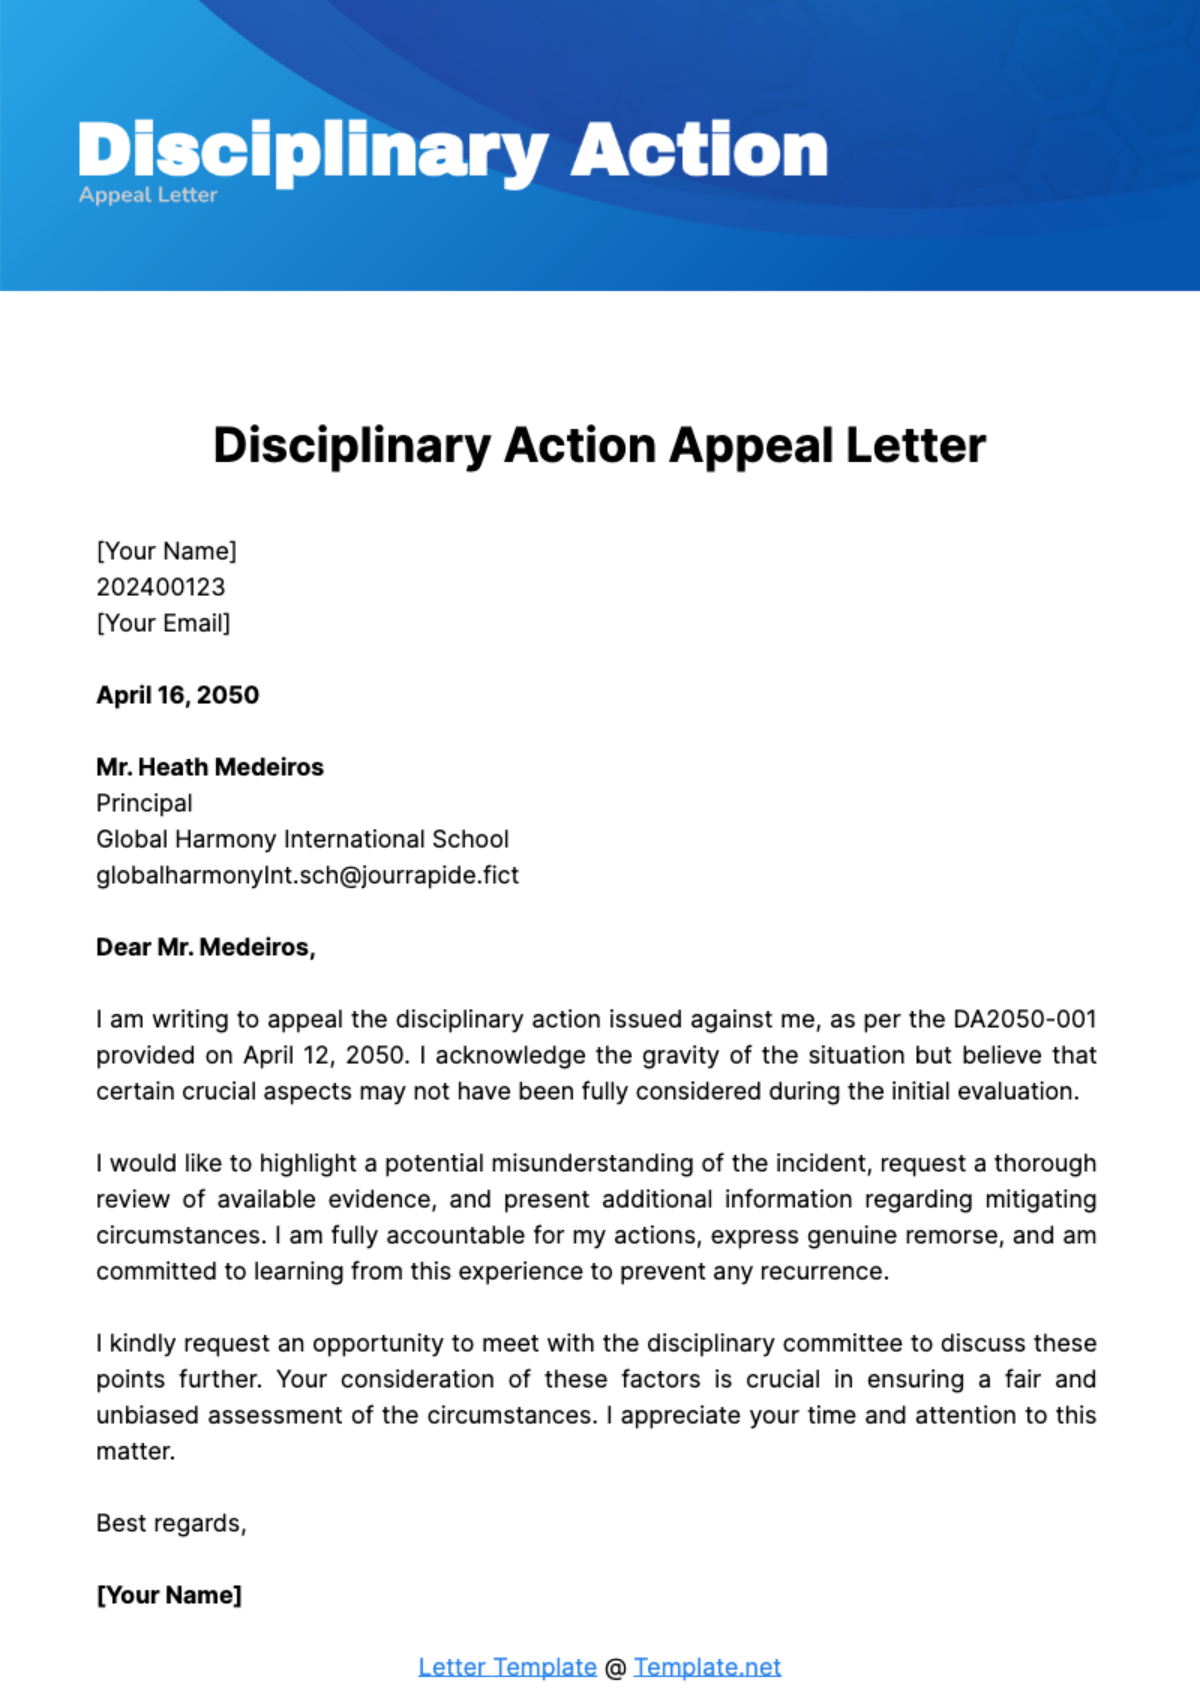 Disciplinary Action Appeal Letter Template